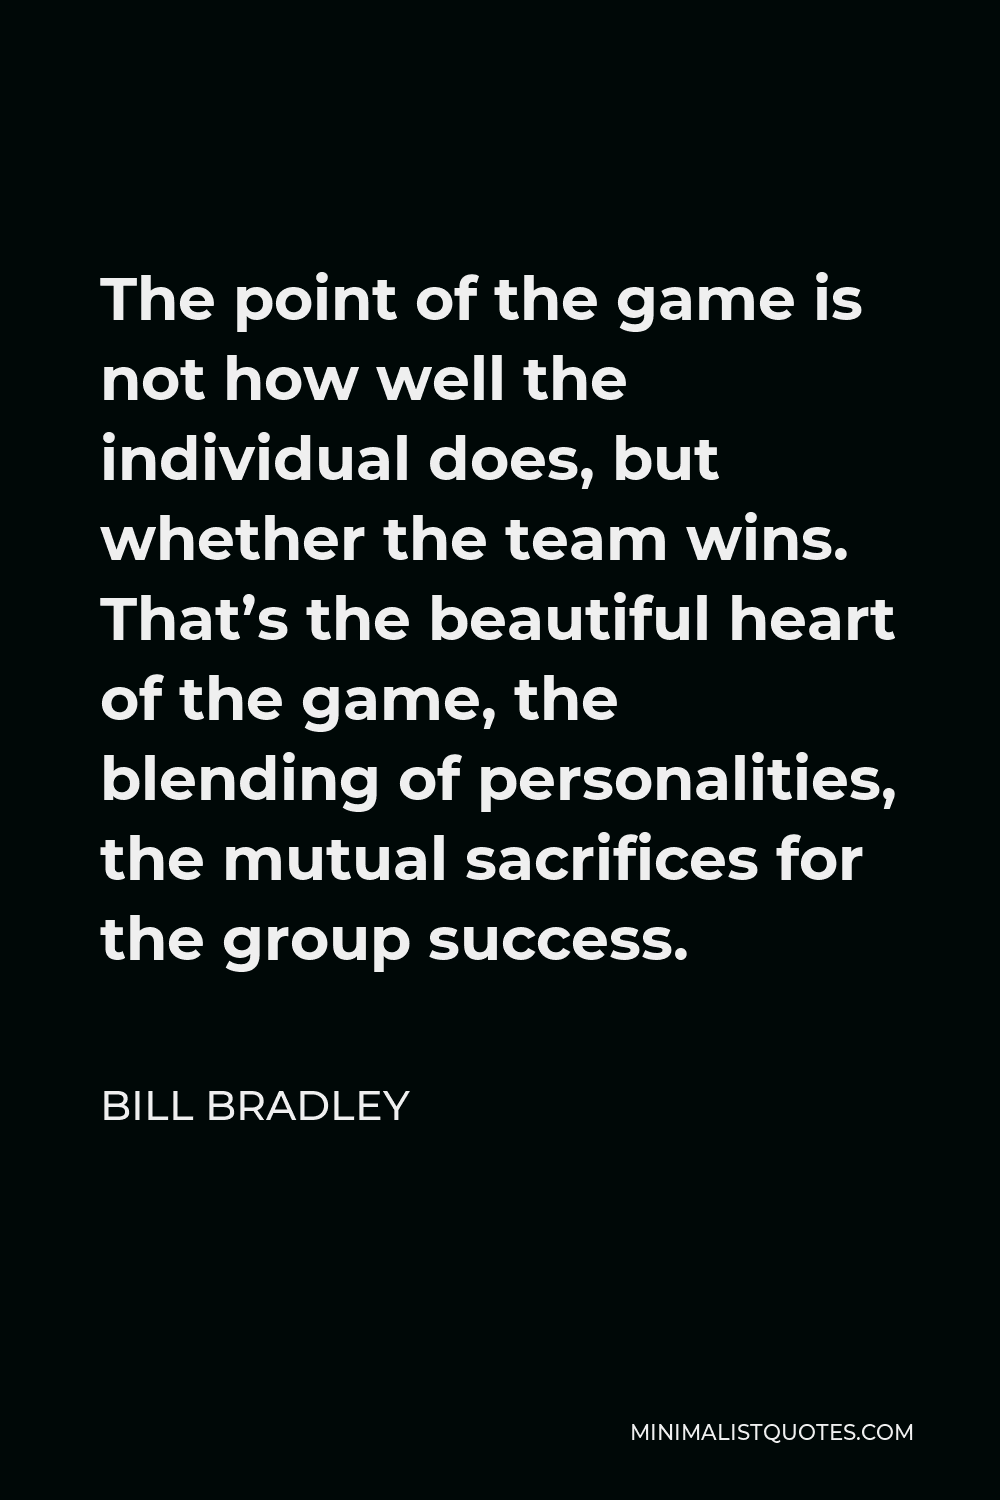 Bill Bradley Quote - The point of the game is not how well the individual does, but whether the team wins. That’s the beautiful heart of the game, the blending of personalities, the mutual sacrifices for the group success.